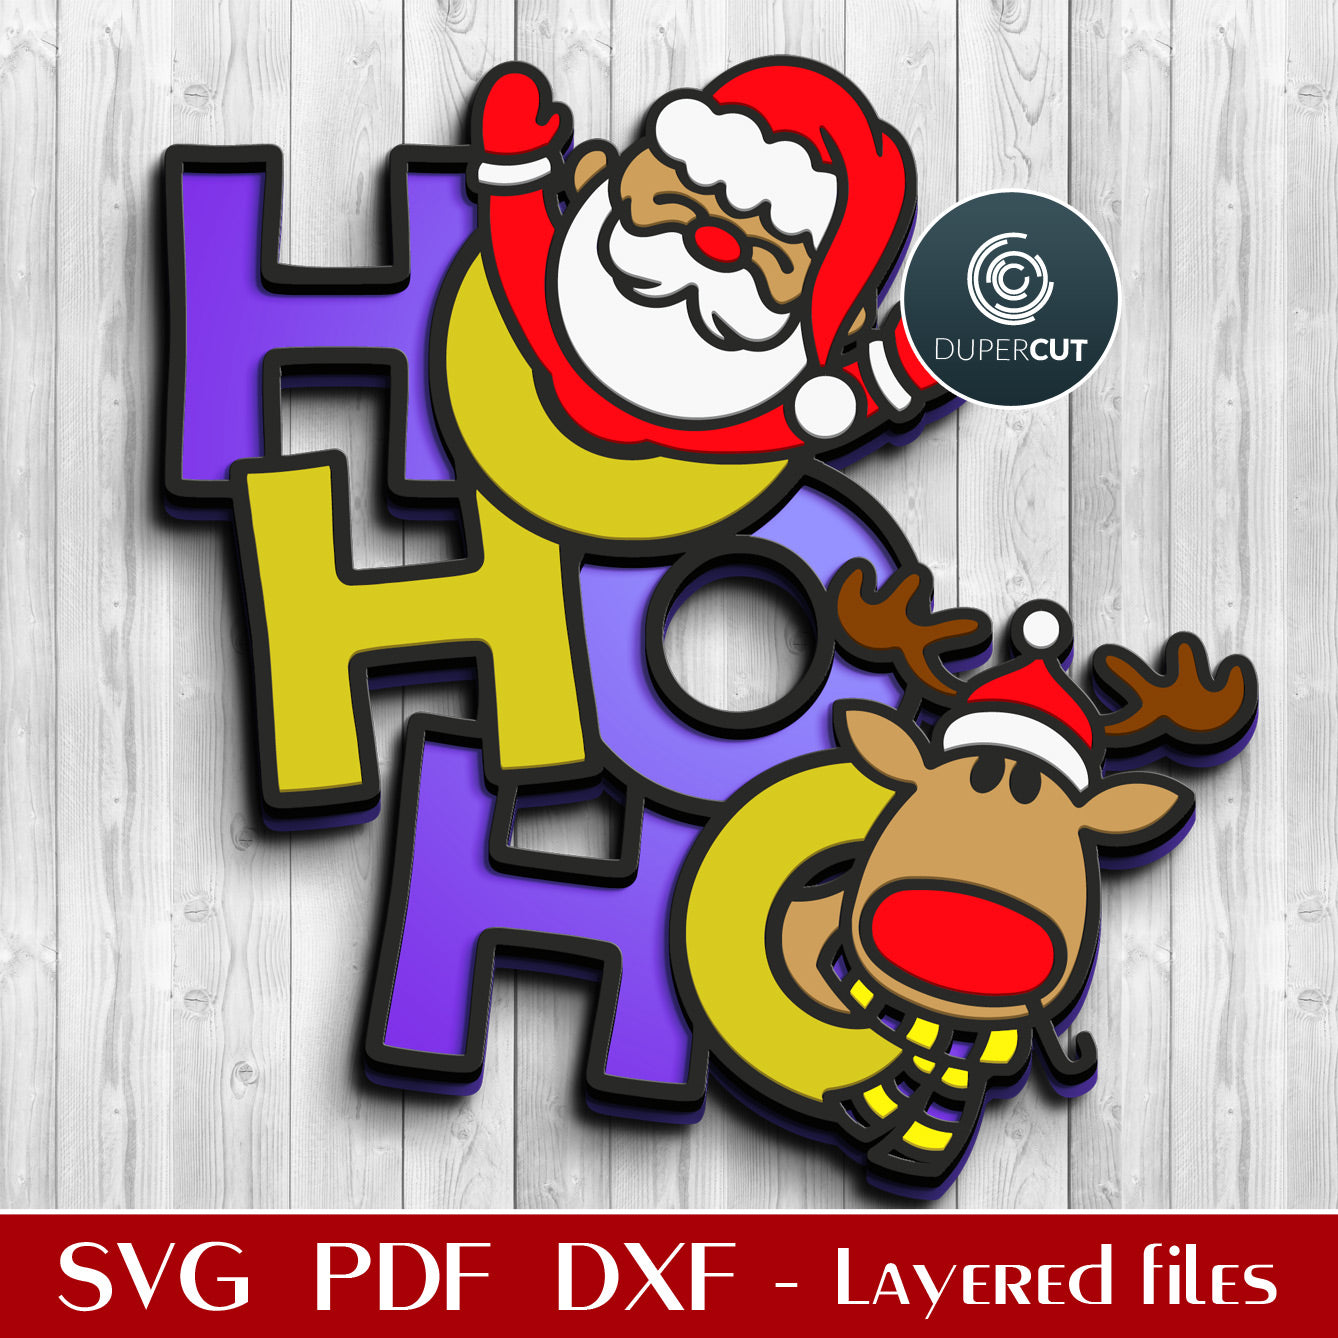 Santa and reindeer Christmas decoration sign HO-HO-HO - SVG DXF layered vector files for laser cutting with Glowforge, Cricut, Silhouette Cameo, CNC plasma by DuperCut